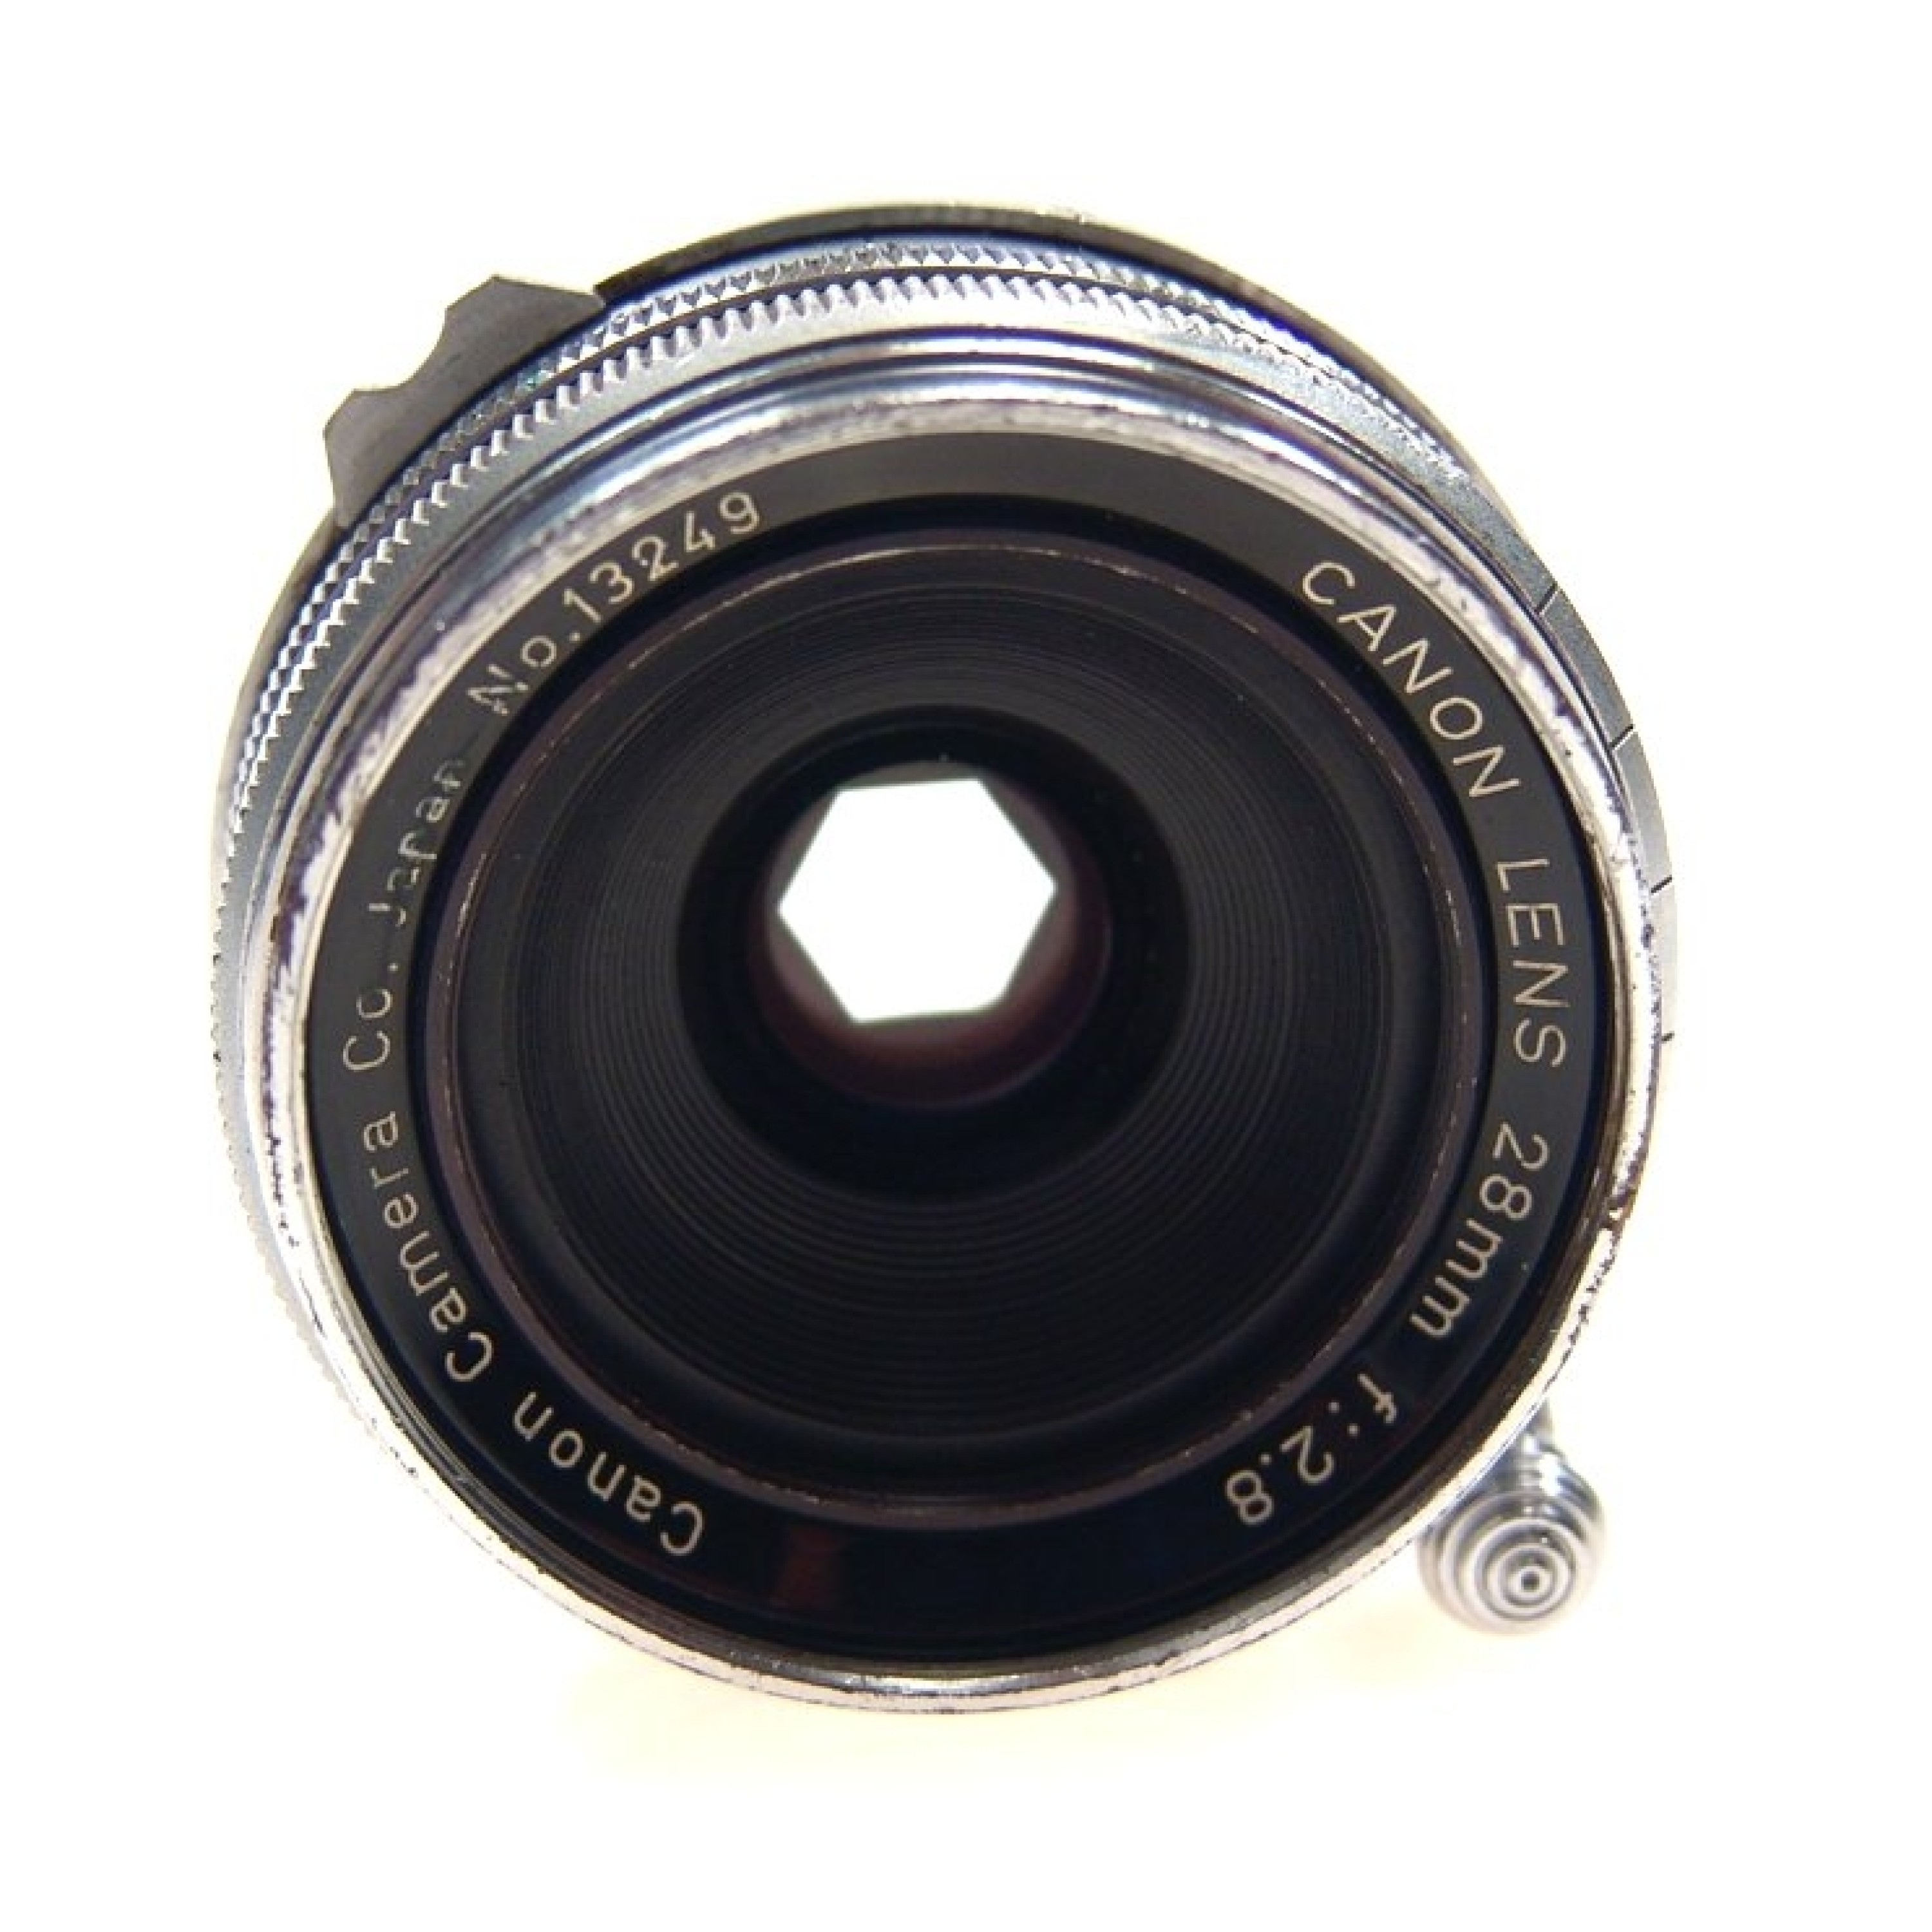 CANON LENS 28mm f2.8 FINDER CASE 2.8/28mm LEICA M39 M9